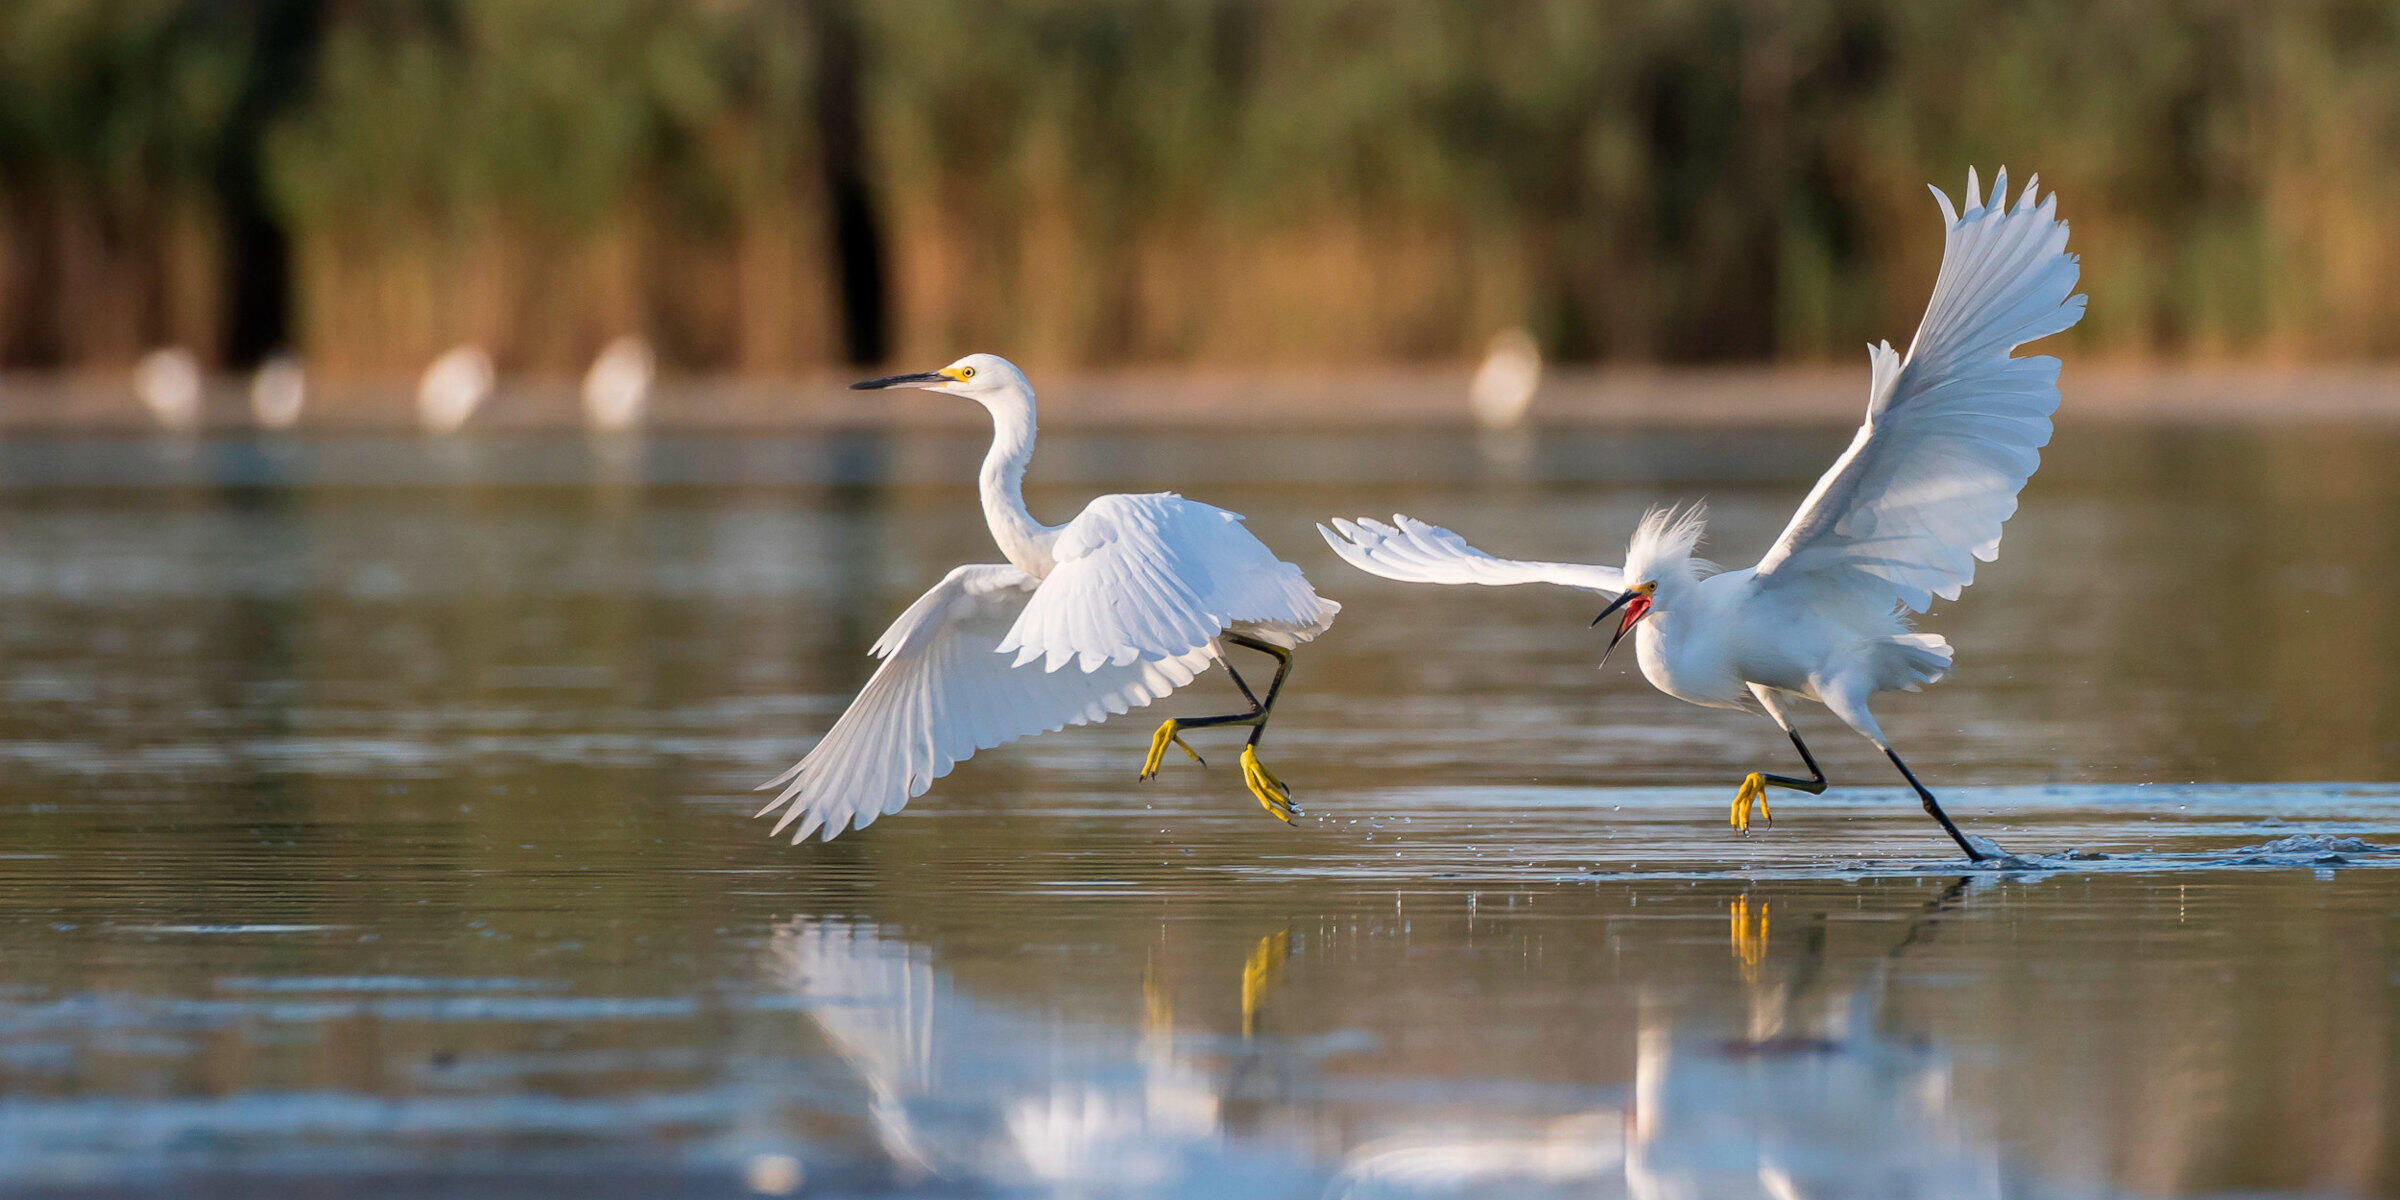 A pair of Snowy Egrets, white wading birds with long legs and necks, take off from a shallow water flat.